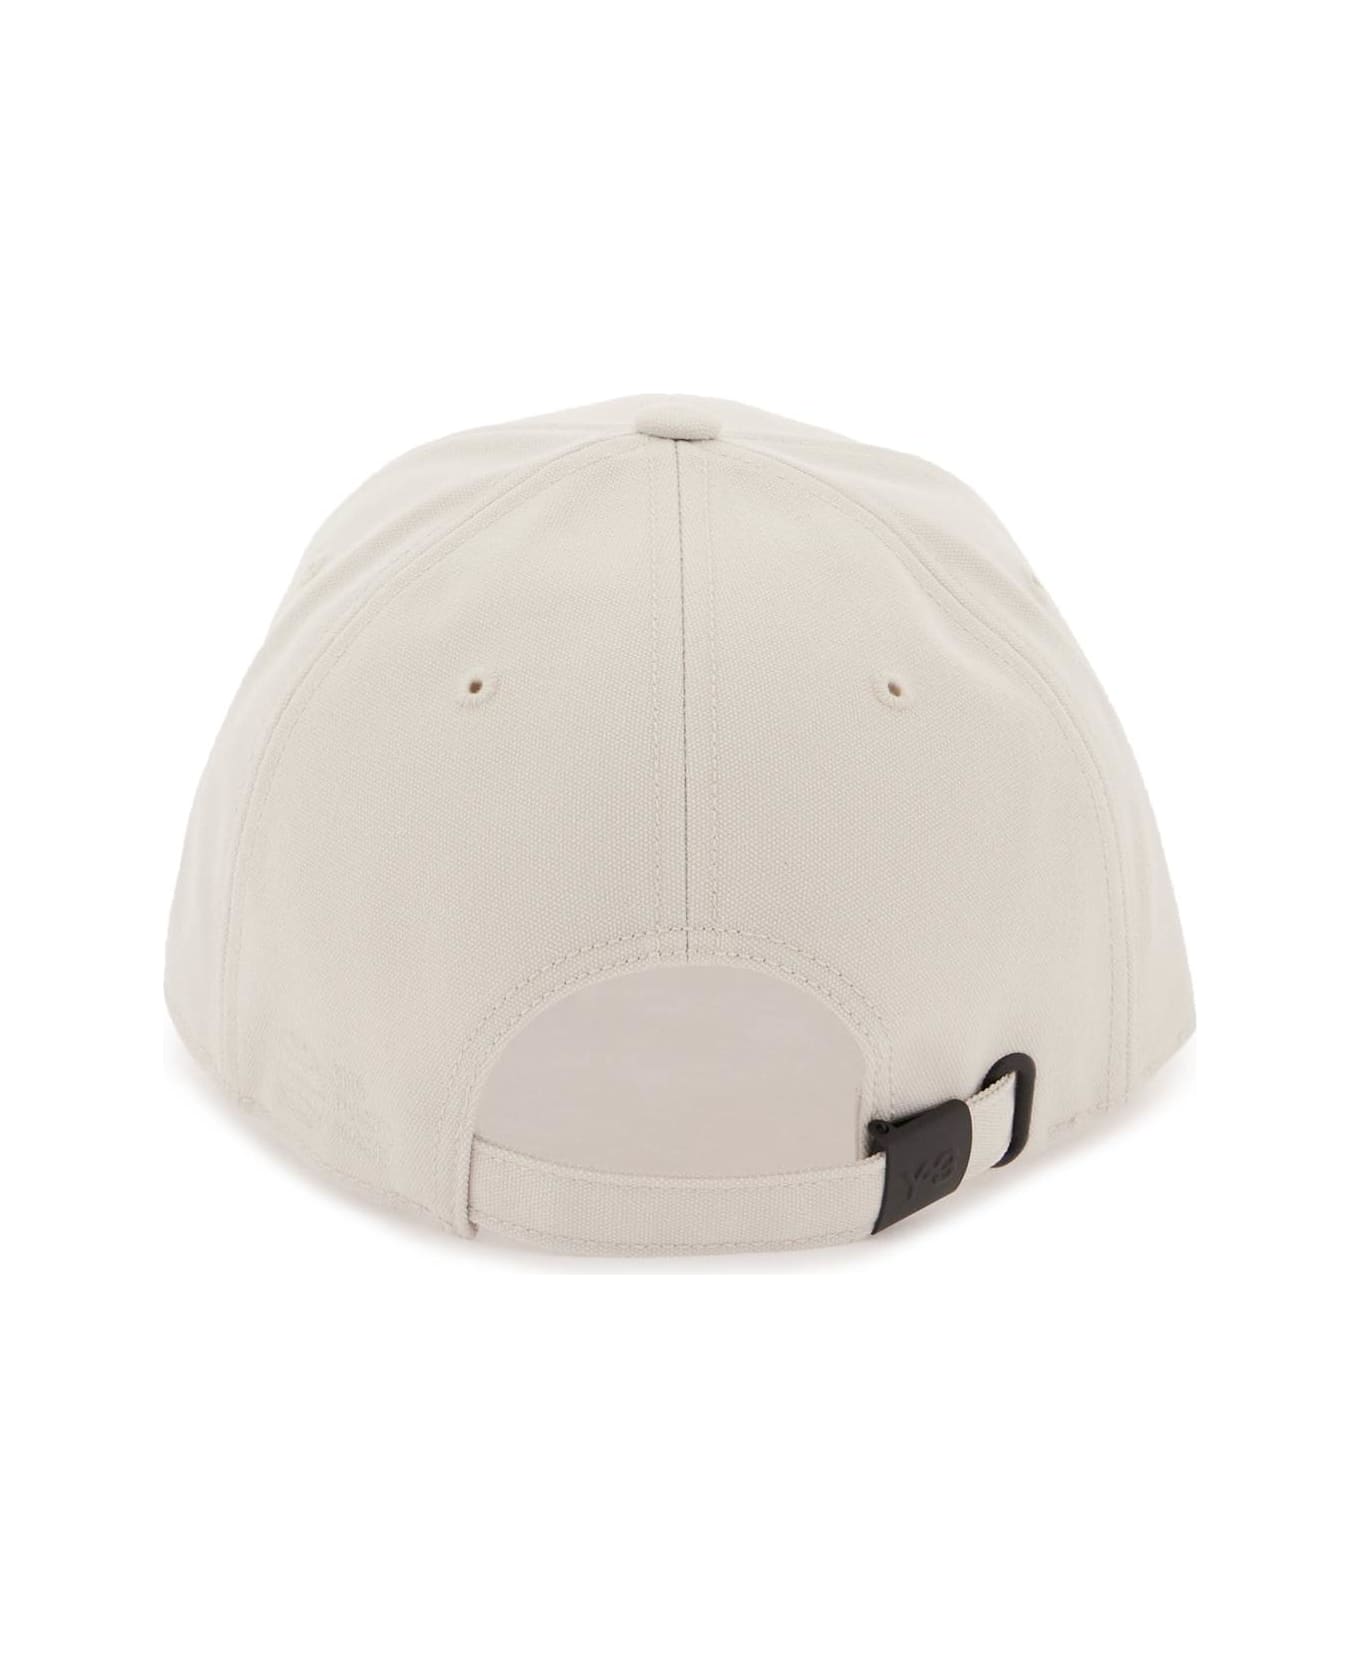 Y-3 Baseball Cap With Embroidered Logo - White